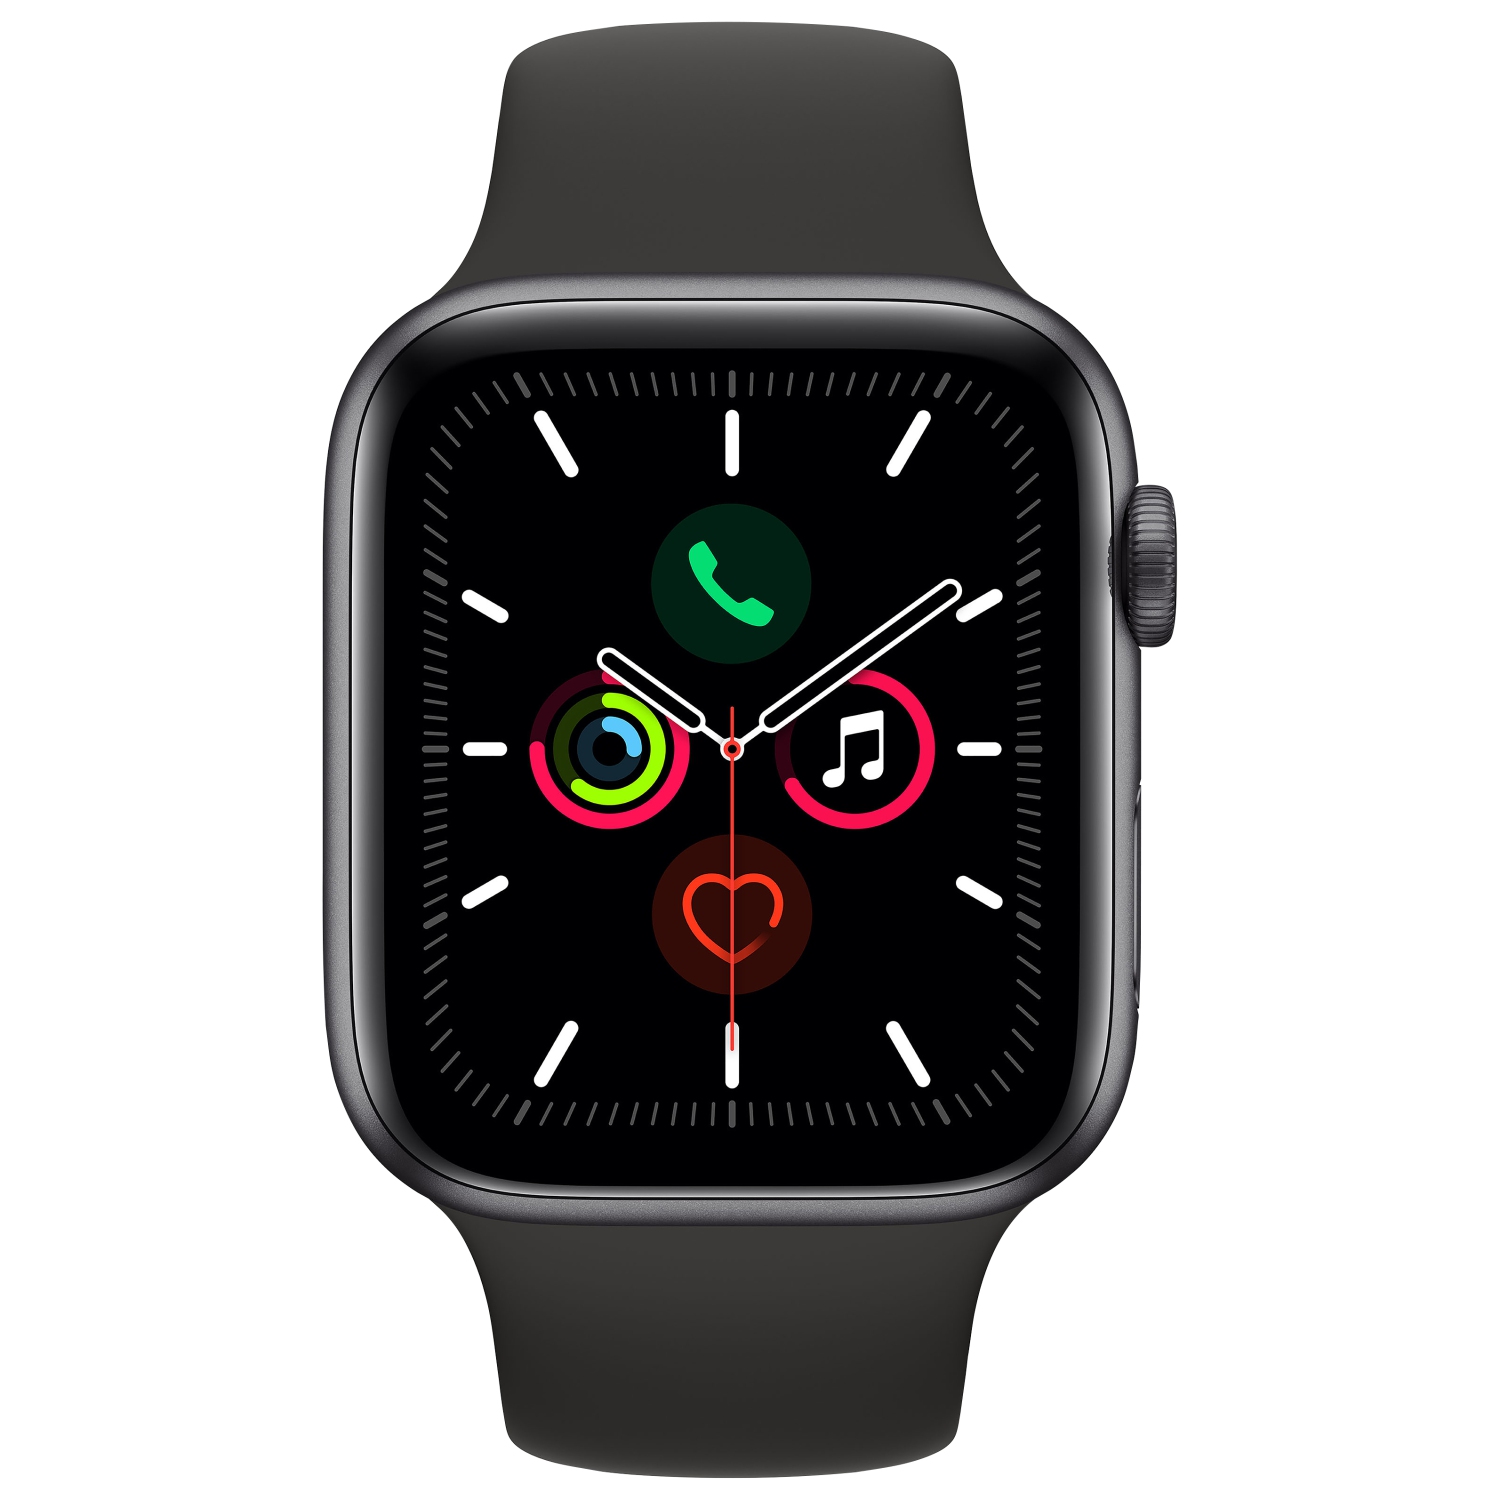 Refurbished (Excellent) - Apple Watch Series 5 (GPS + Cellular) 44mm Space Grey Aluminum Case w/ Black Sport Band